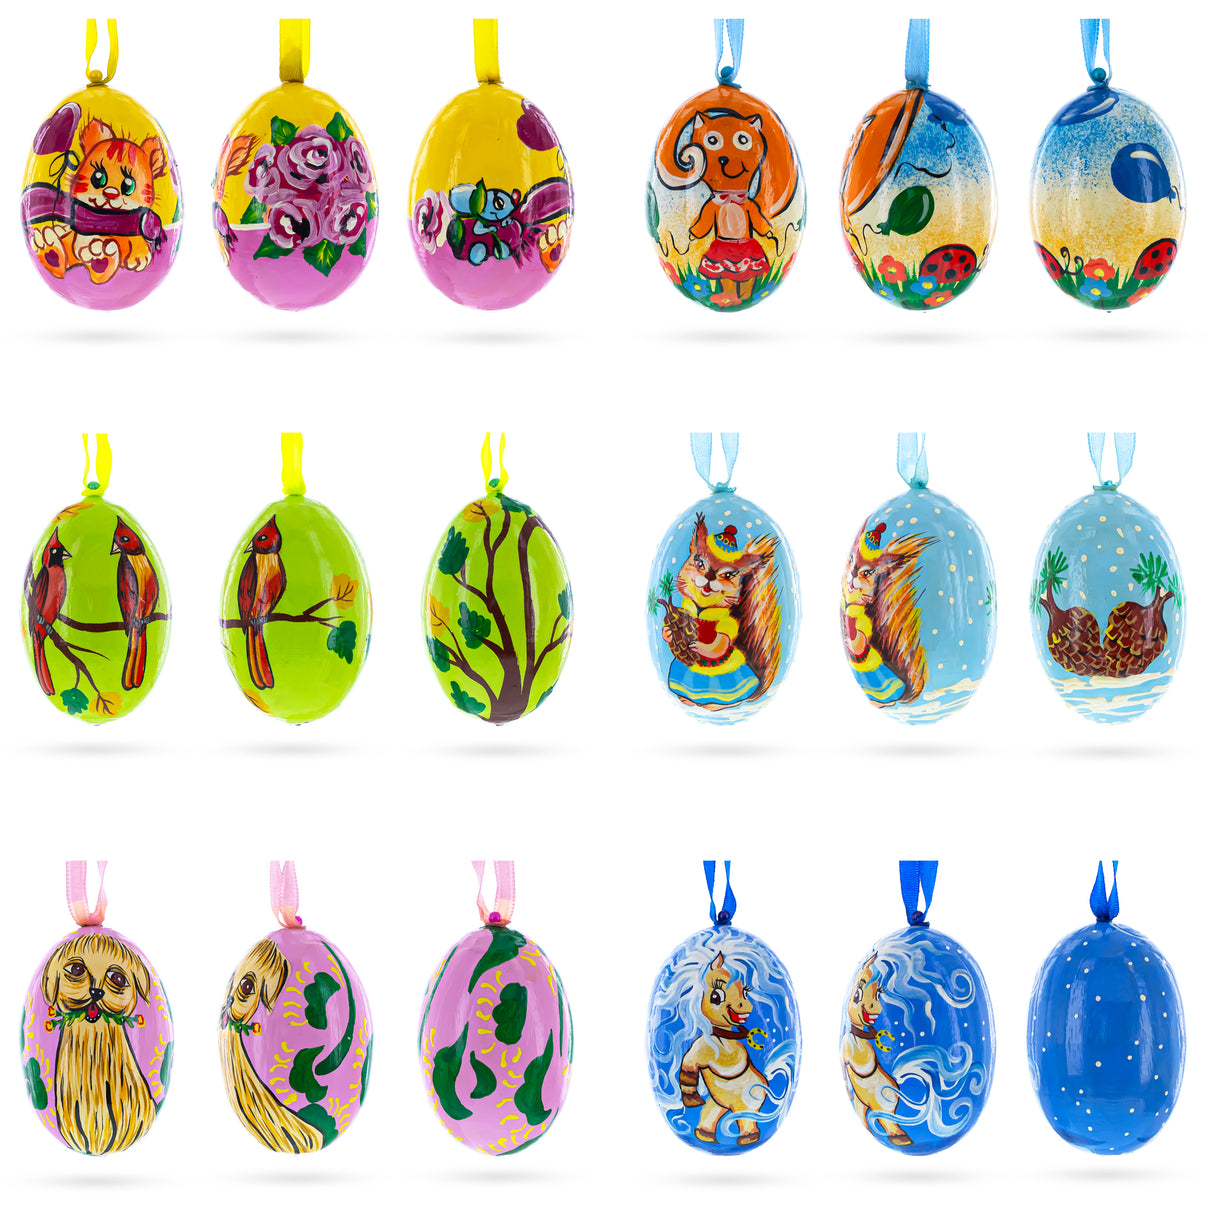 Buy Christmas Ornaments Animals Sets Farm Animals Wild Animals Cats Dogs by BestPysanky Online Gift Ship